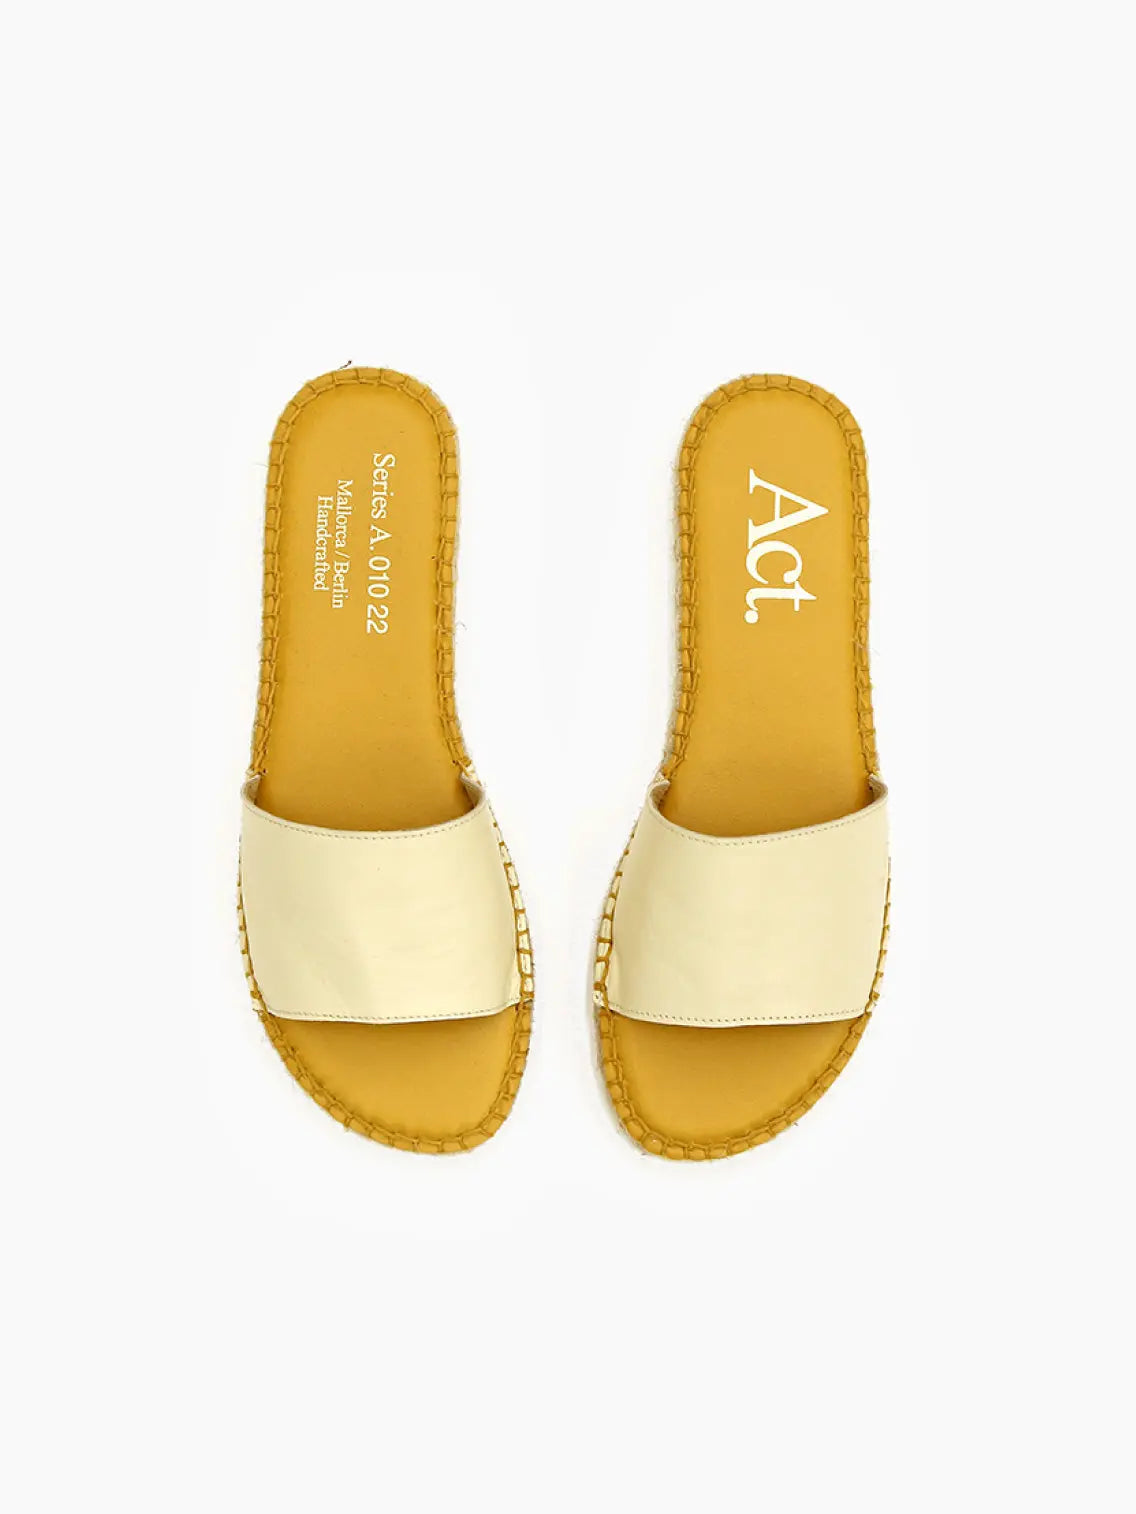 A pair of Ennart White Espadrilles from Act Series, available at Bassalstore in Barcelona, lie on a white background. The insoles have text on them, including the word "Act." The edges of the soles have a woven texture, resembling straw or wicker.